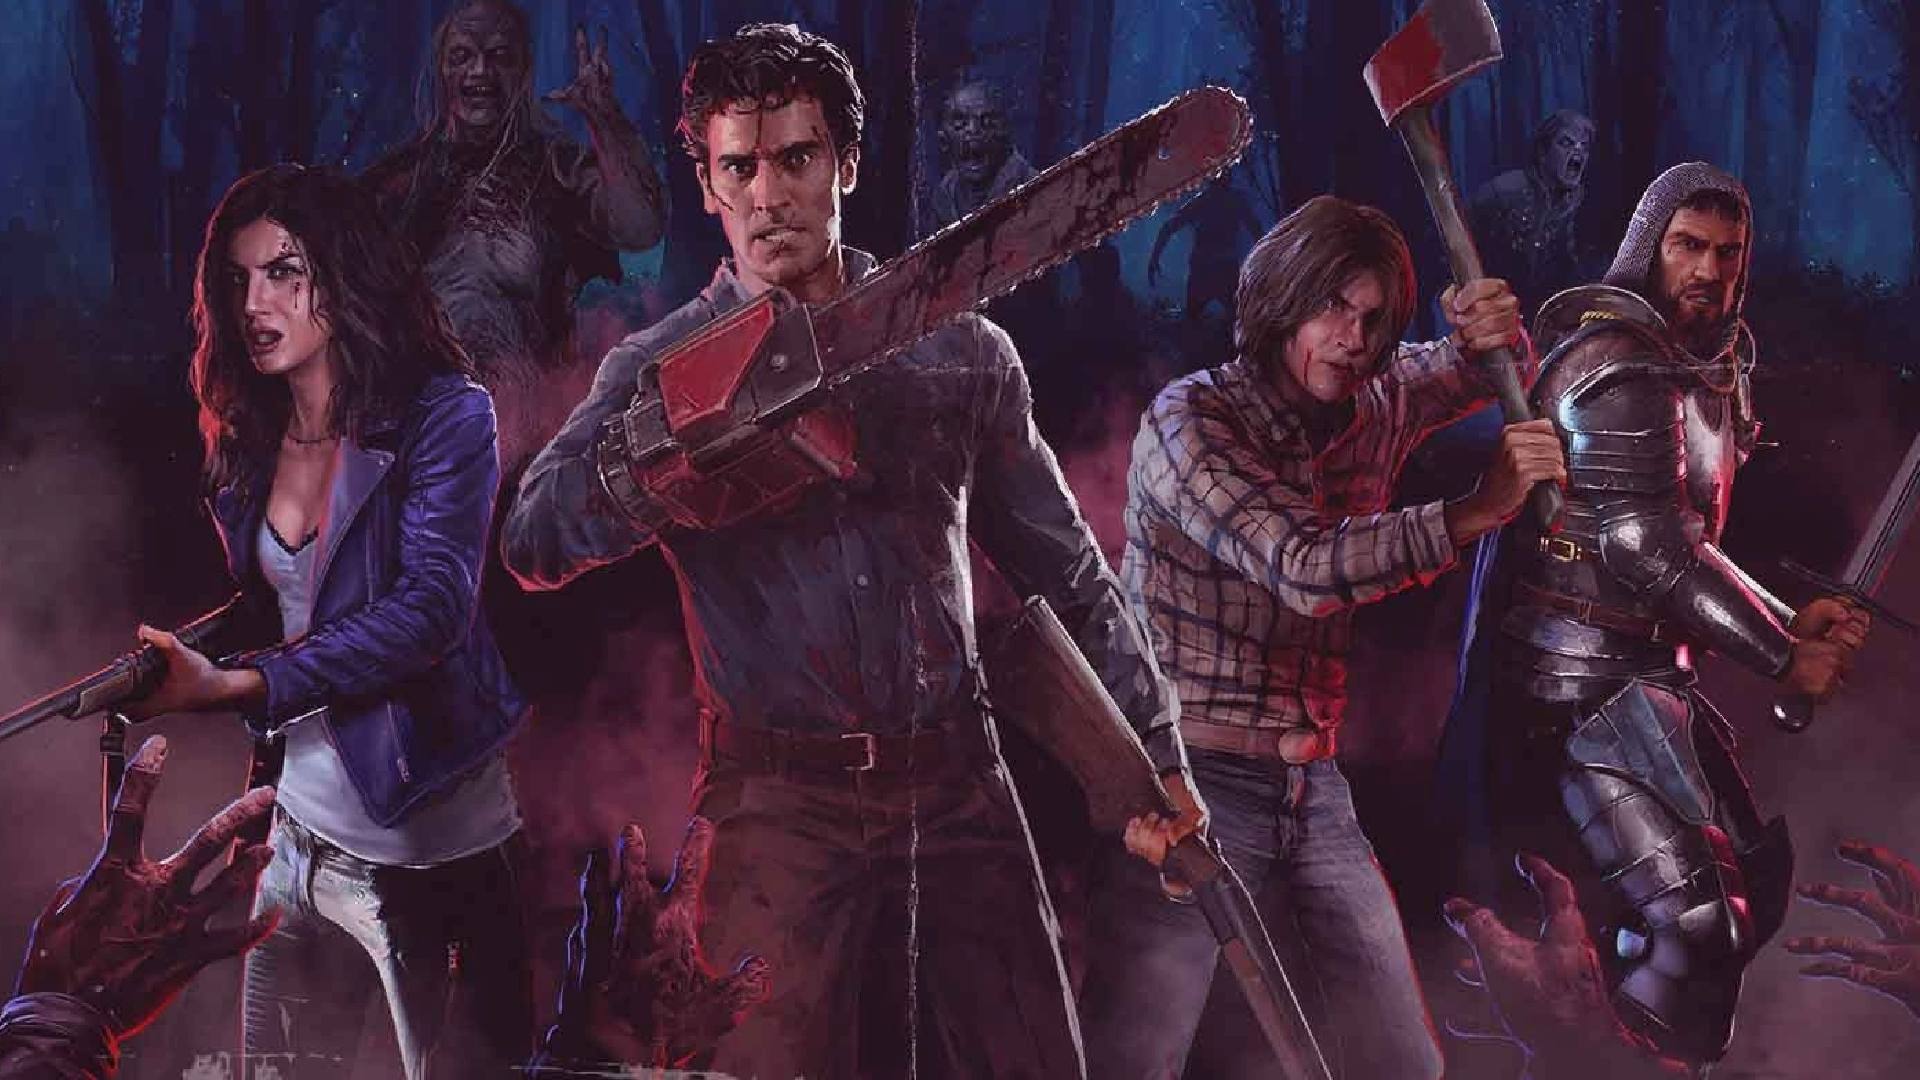 Xbox Game Pass 2022 day one launches: Ash Williams, Scotty, Kelley, and Lord Arthur can be seen fighting zombies with various weapons.